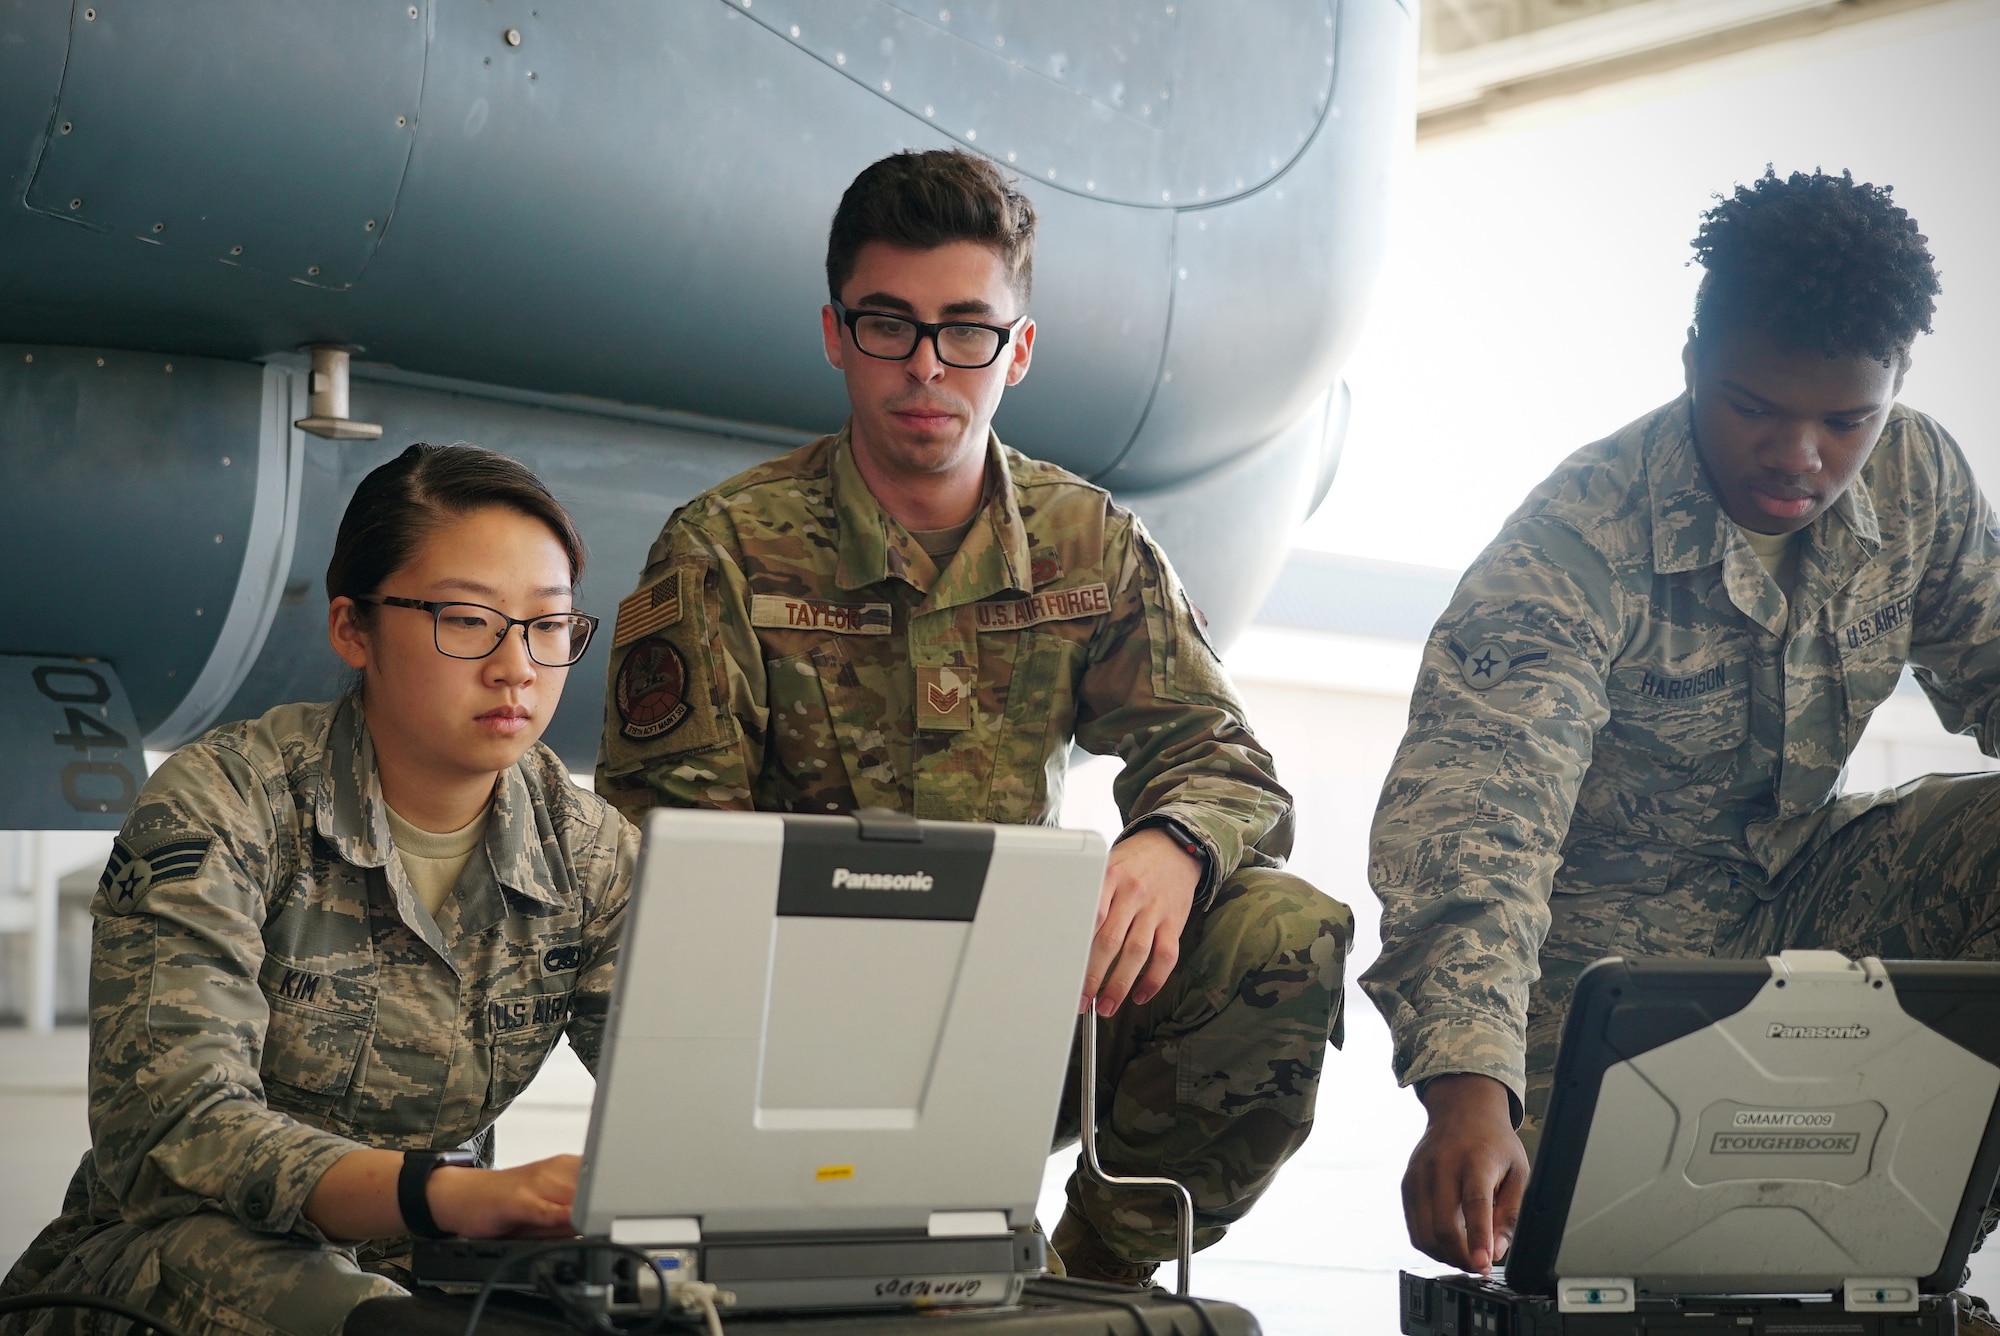 Three uniformed military members kneel down shoulder-to-shoulder in front of portable computers they have placed on the ground.